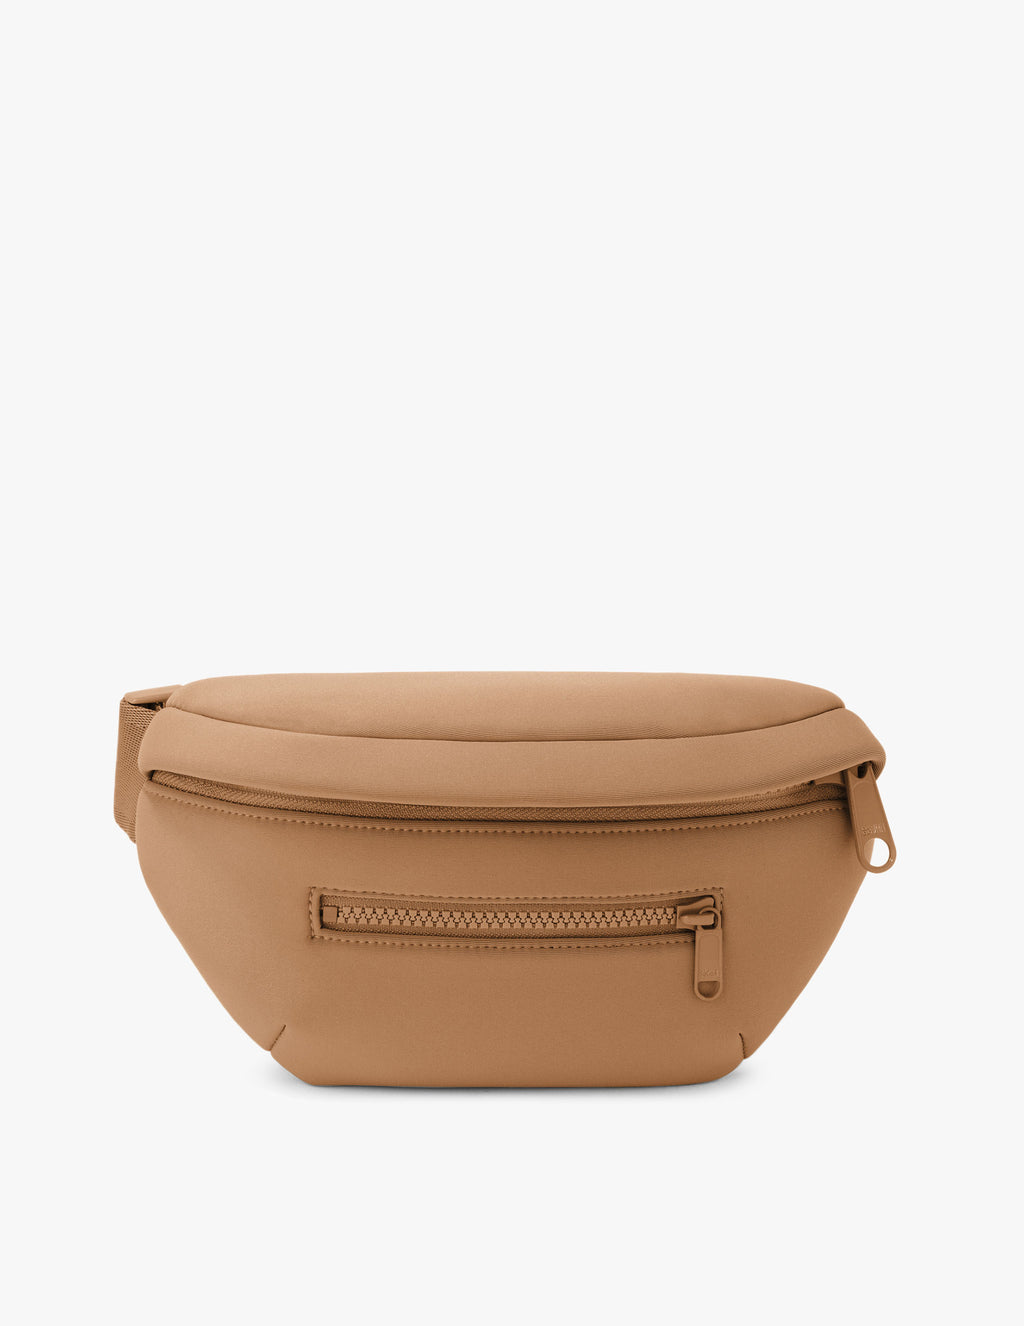 Dagne Dover Ace Fanny Pack Featured Image